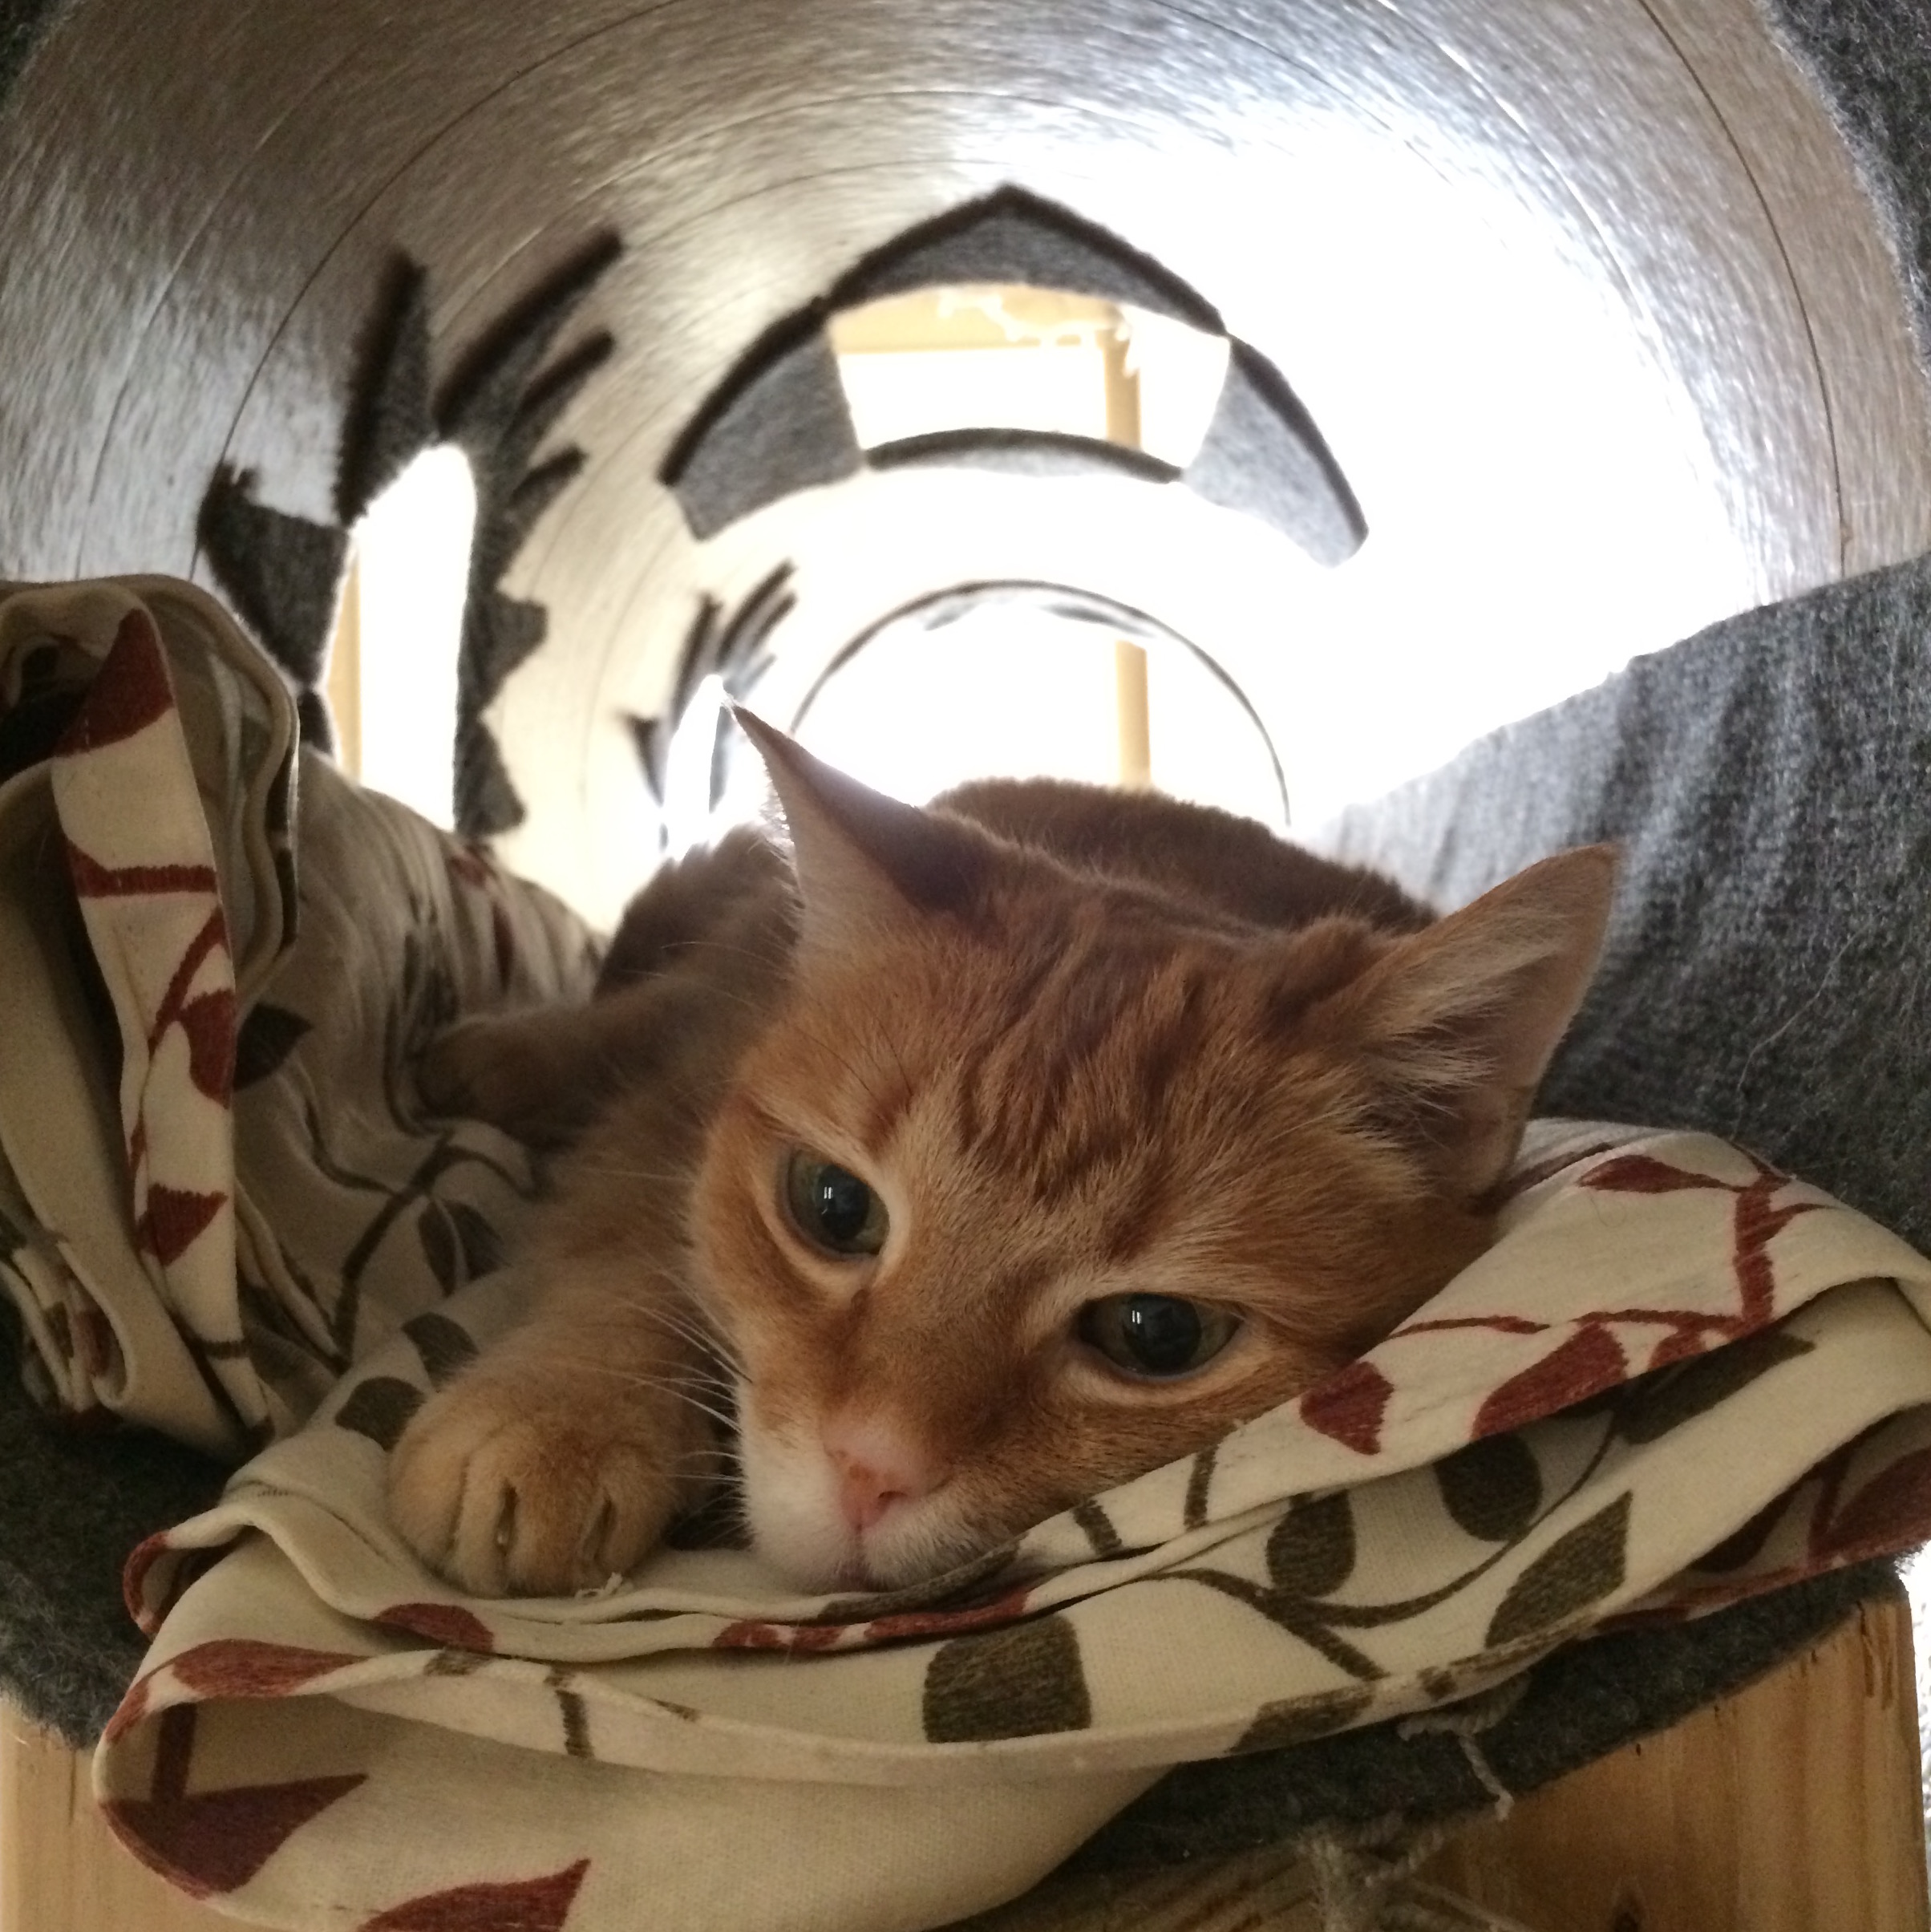 An orange tabby facing the camera, laying down inside a round tube.